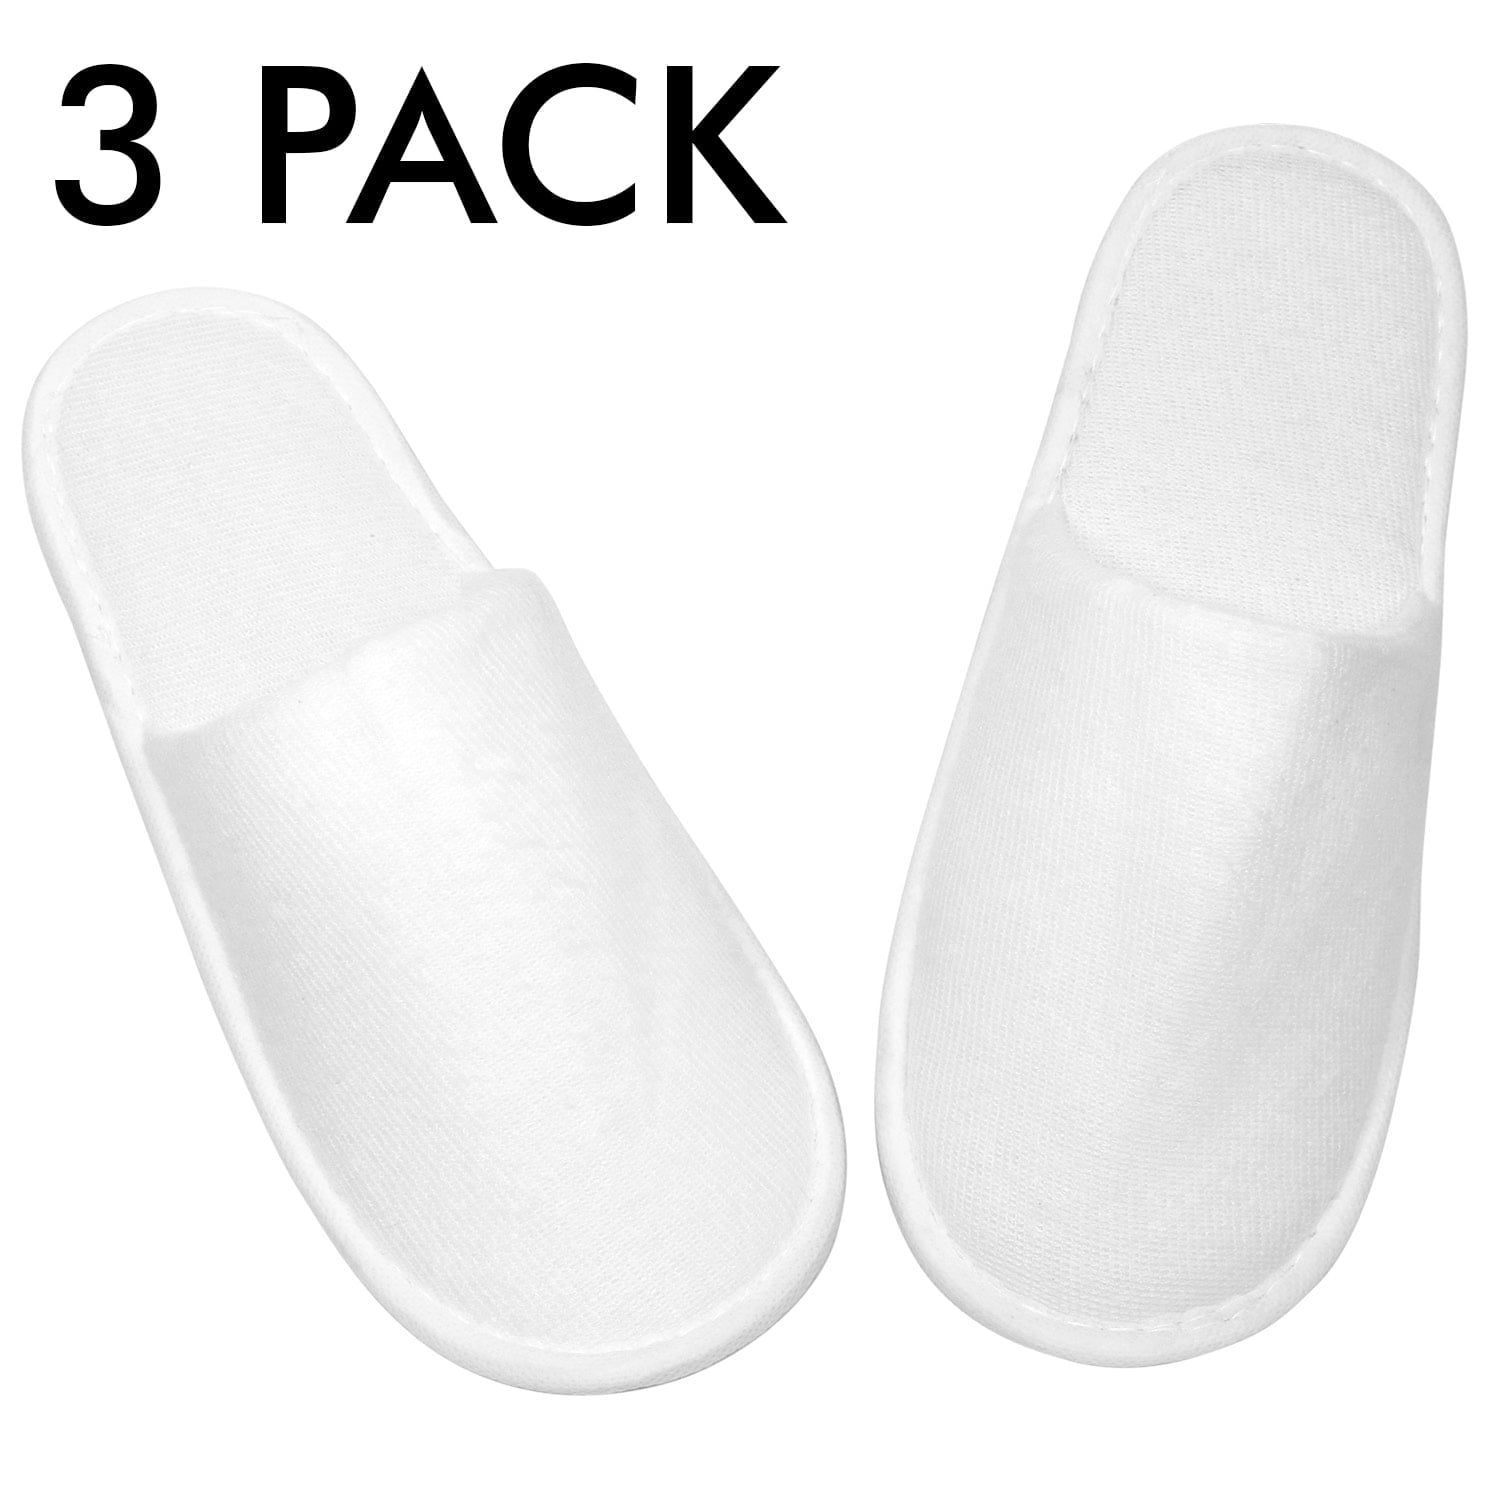 6 Pairs Disposable Slippers, Closed Toe Spa Slippers White Non-Slip for  Hotel, Travel, Guest, Home - Fits Up to US Men Size 10 & Women Size 11  (Regular) 